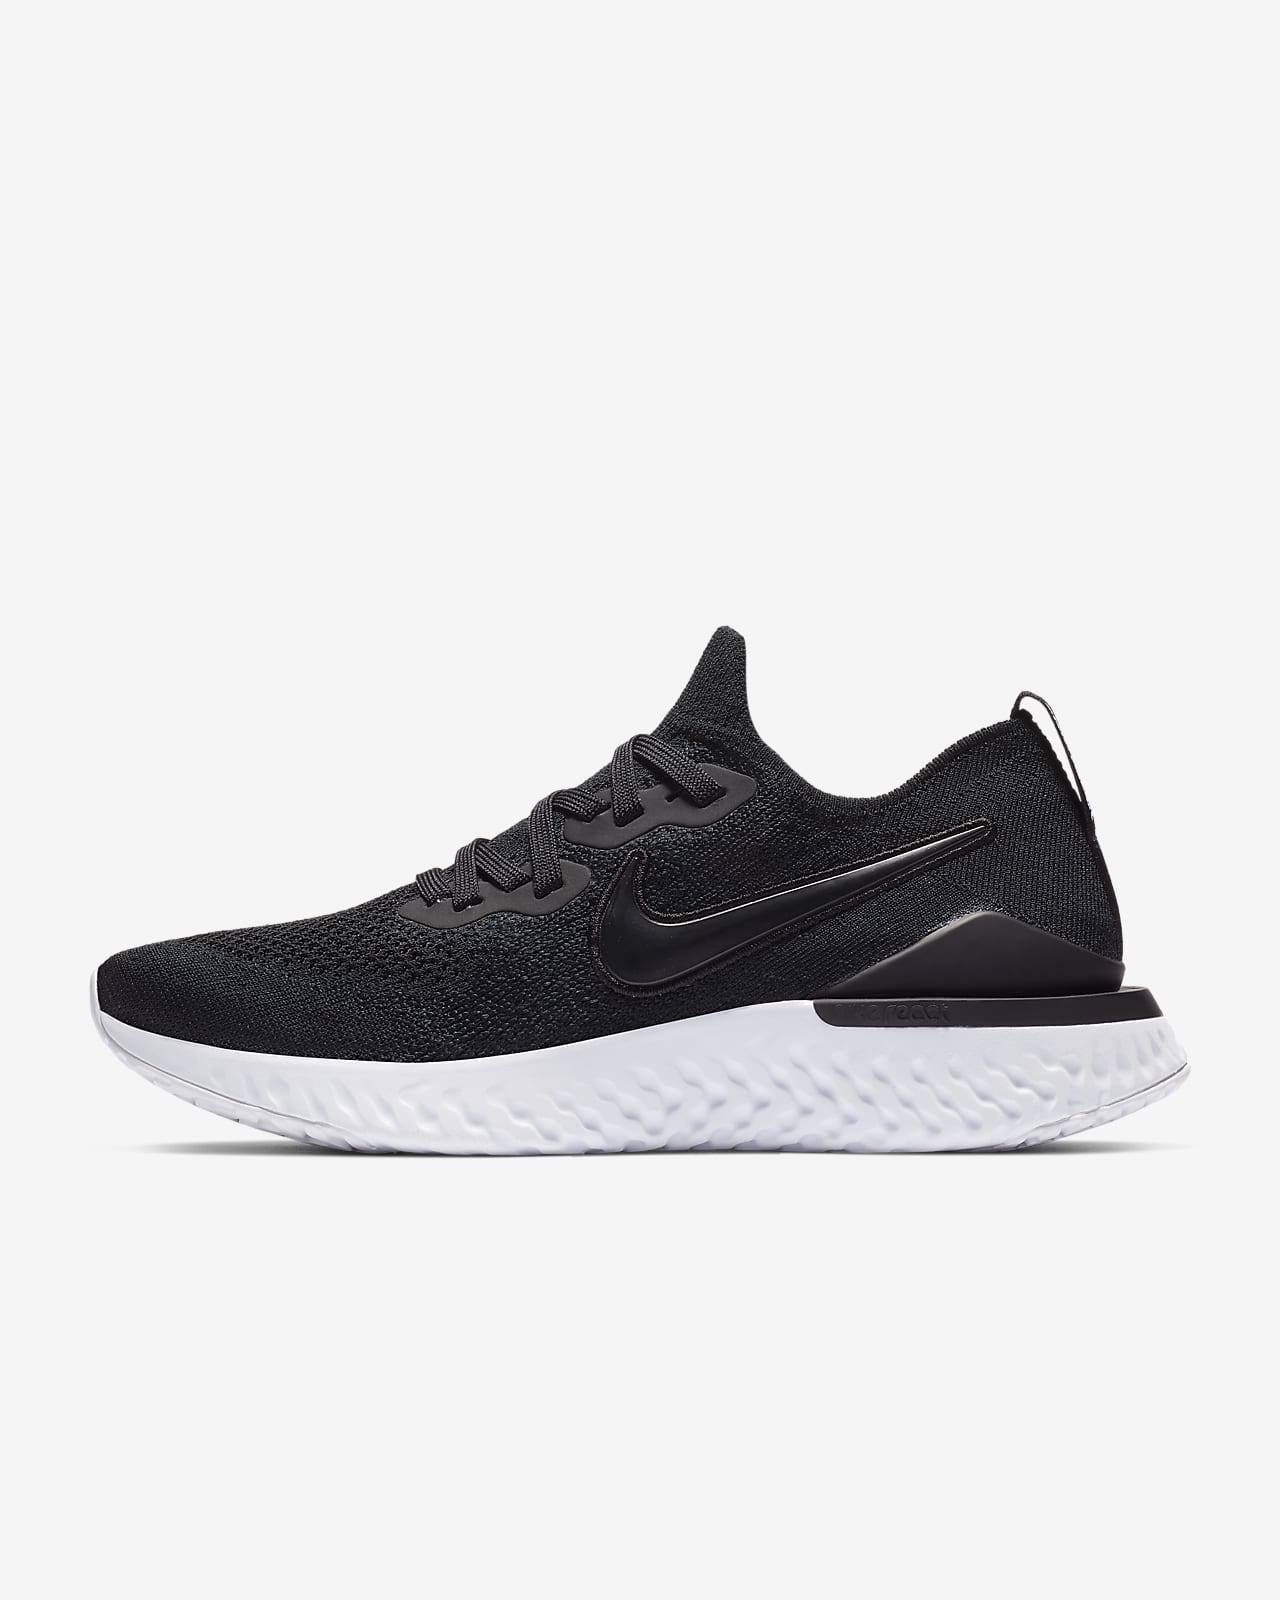 are nike epic react flyknit 2 good for running